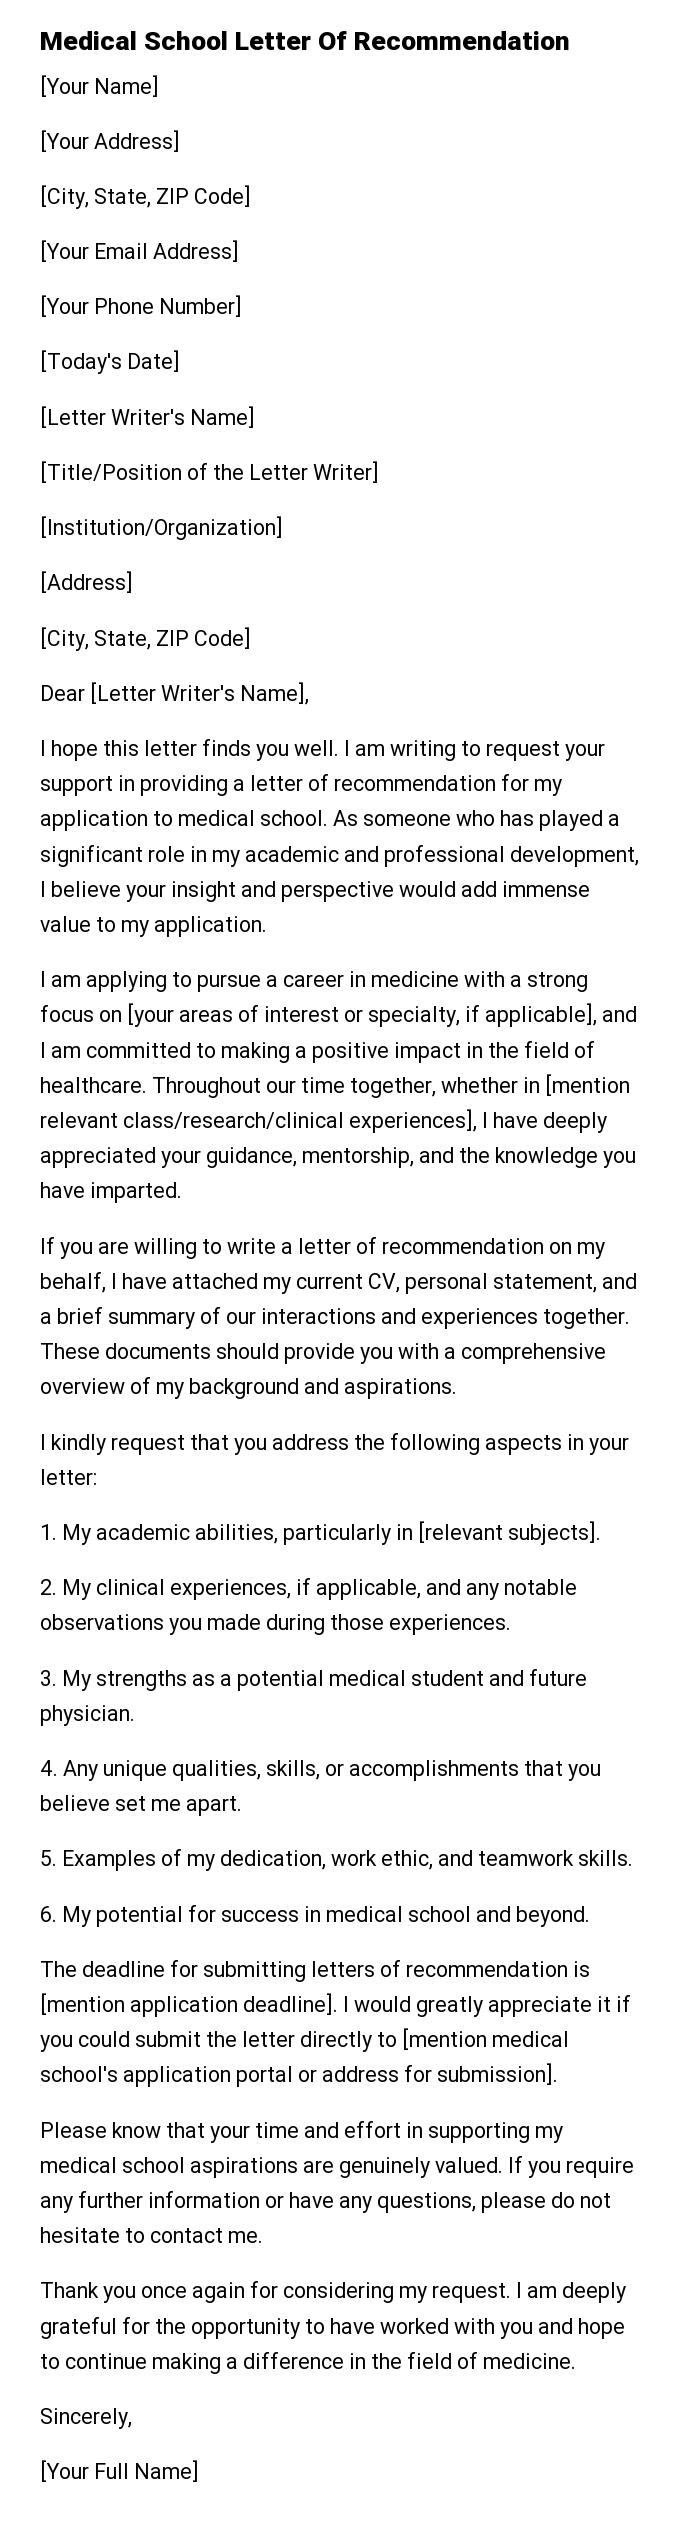 Medical School Letter Of Recommendation